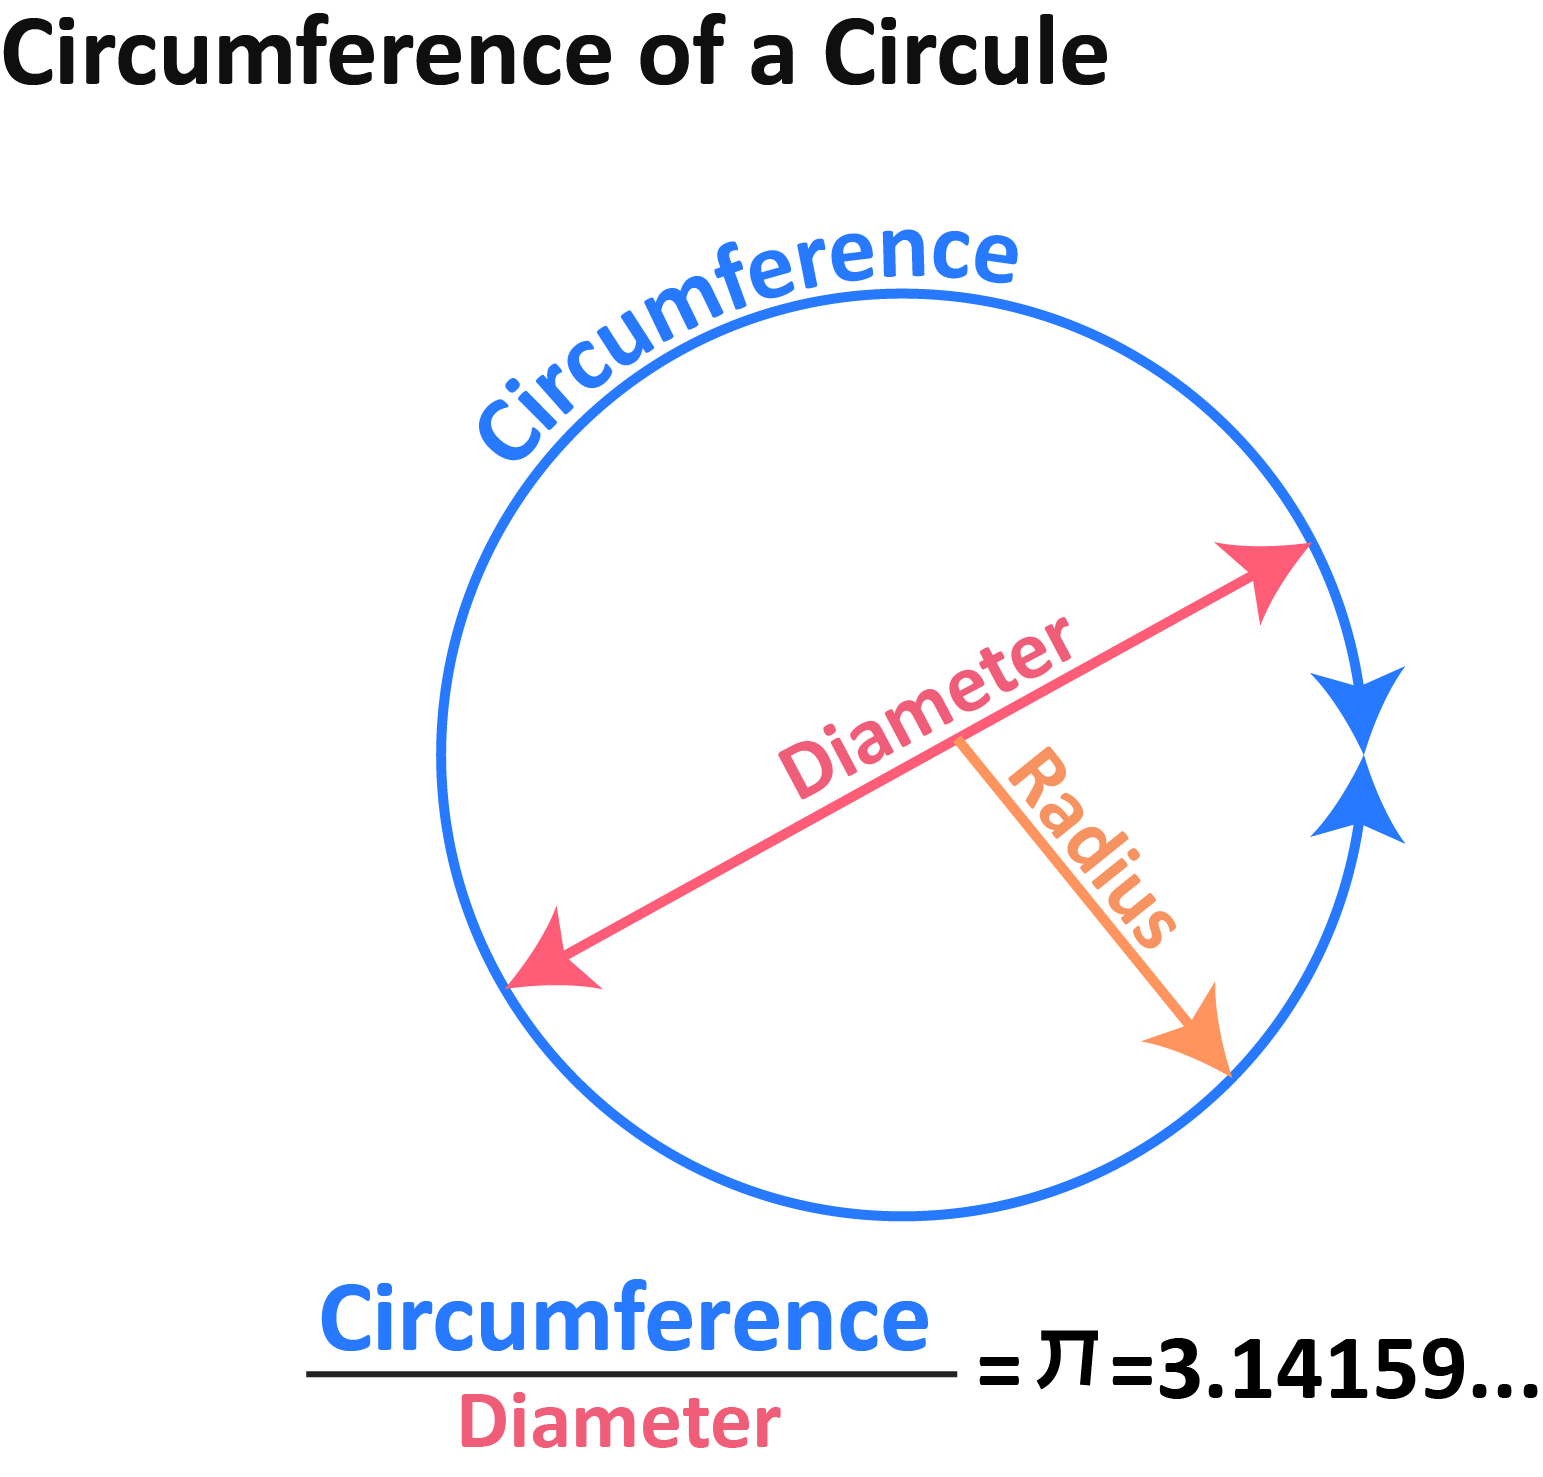 The circumference of the circle